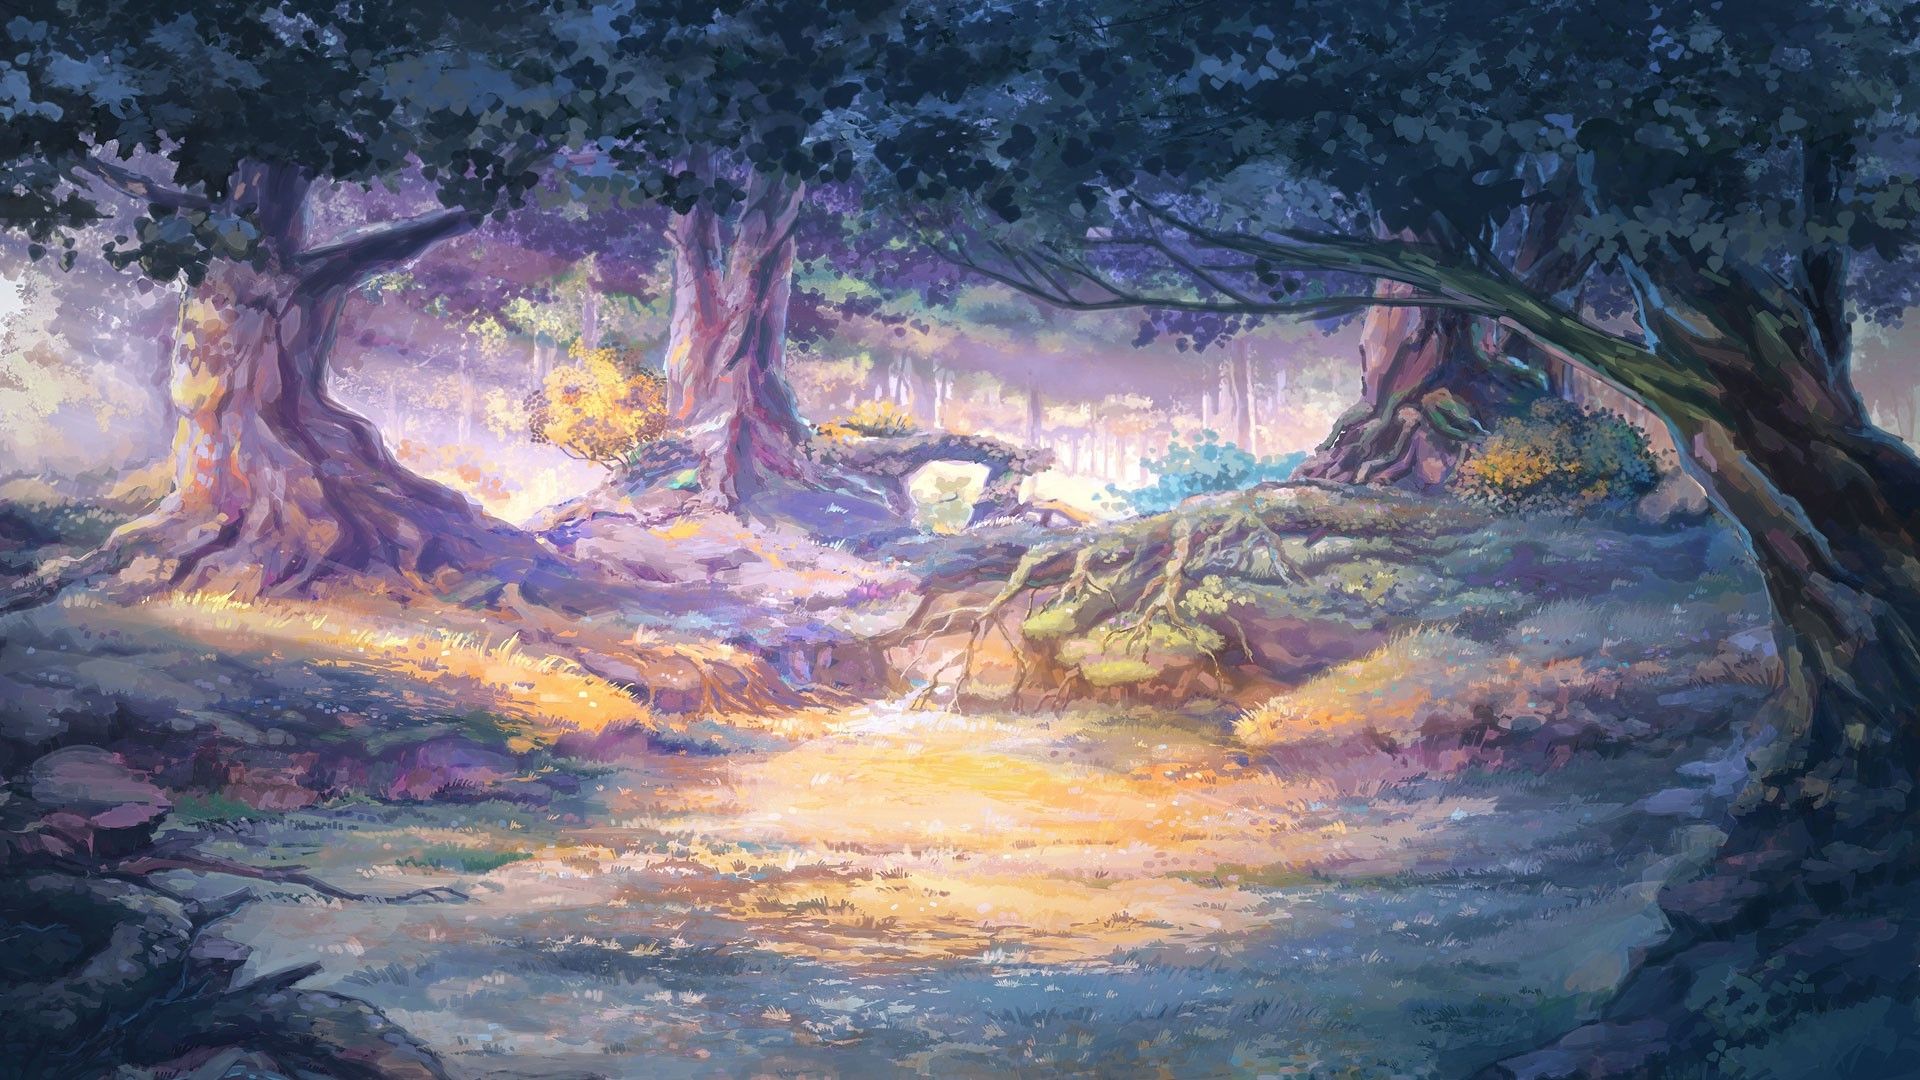 Wallpaper, sunlight, painting, artwork, forest clearing, Everlasting Summer, wetland, 1920x1080 px, impressionist 1920x1080